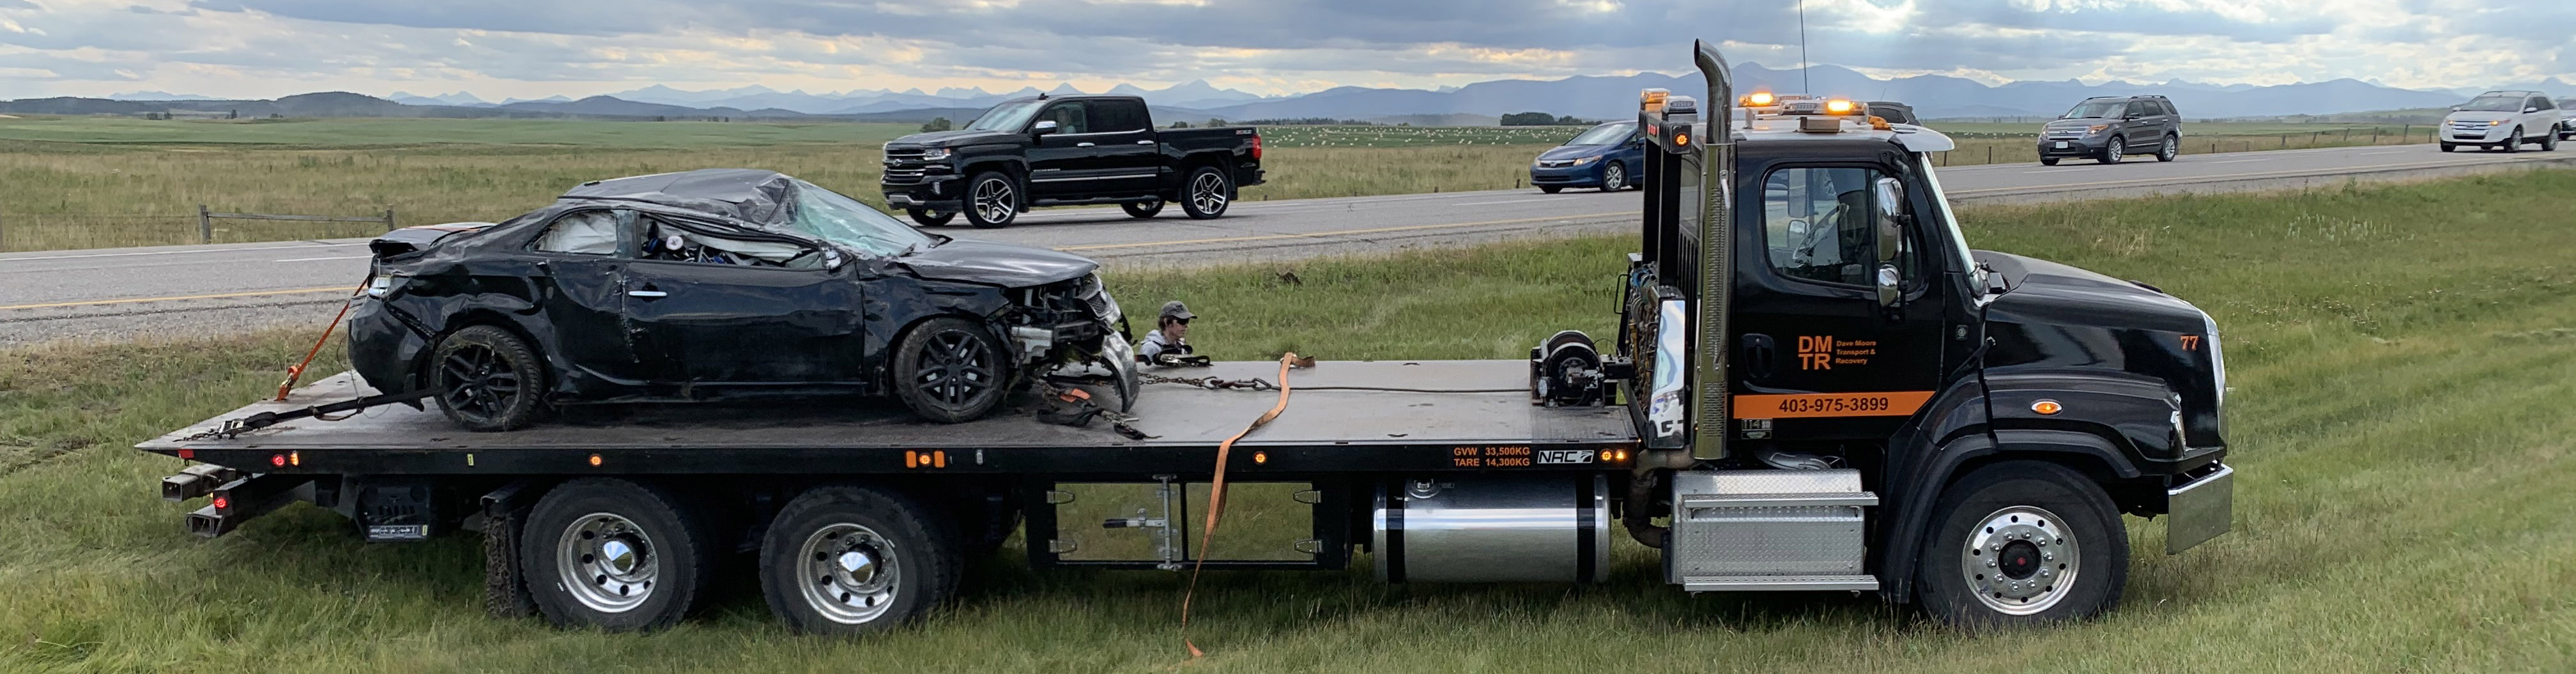 accient car on flatbed